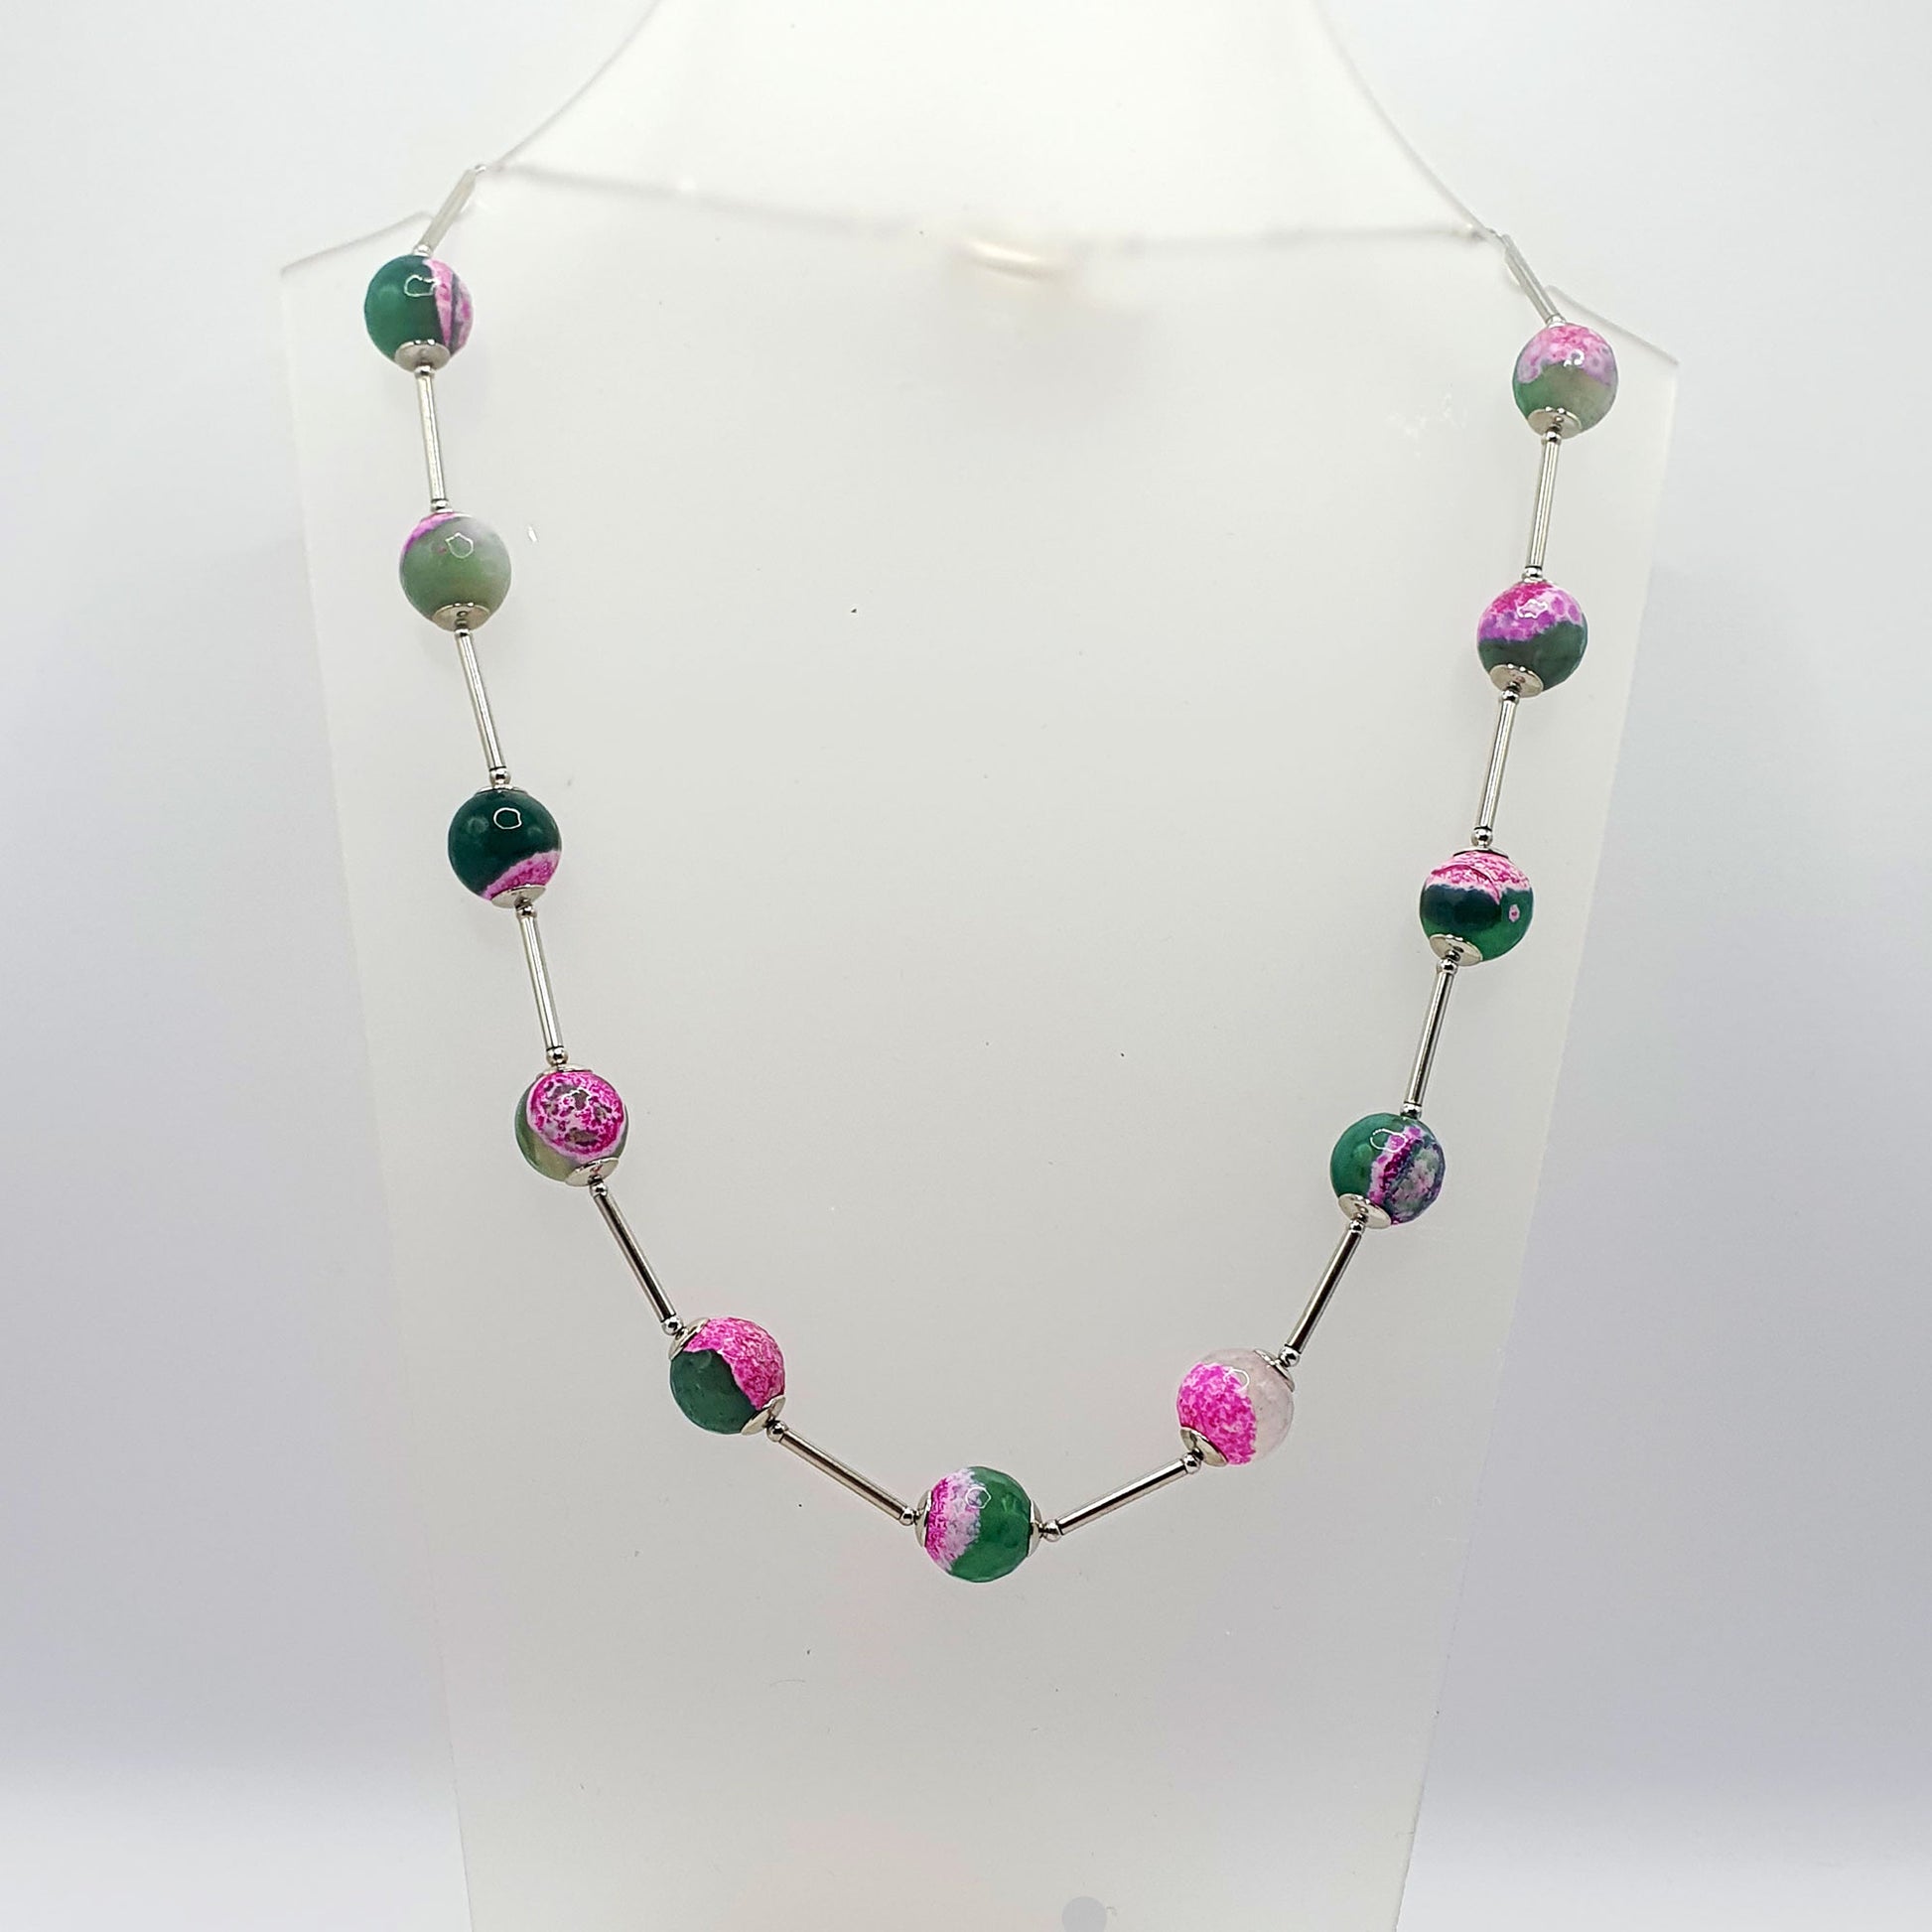 Orb style necklace in pink and green fuchsia faceted agate